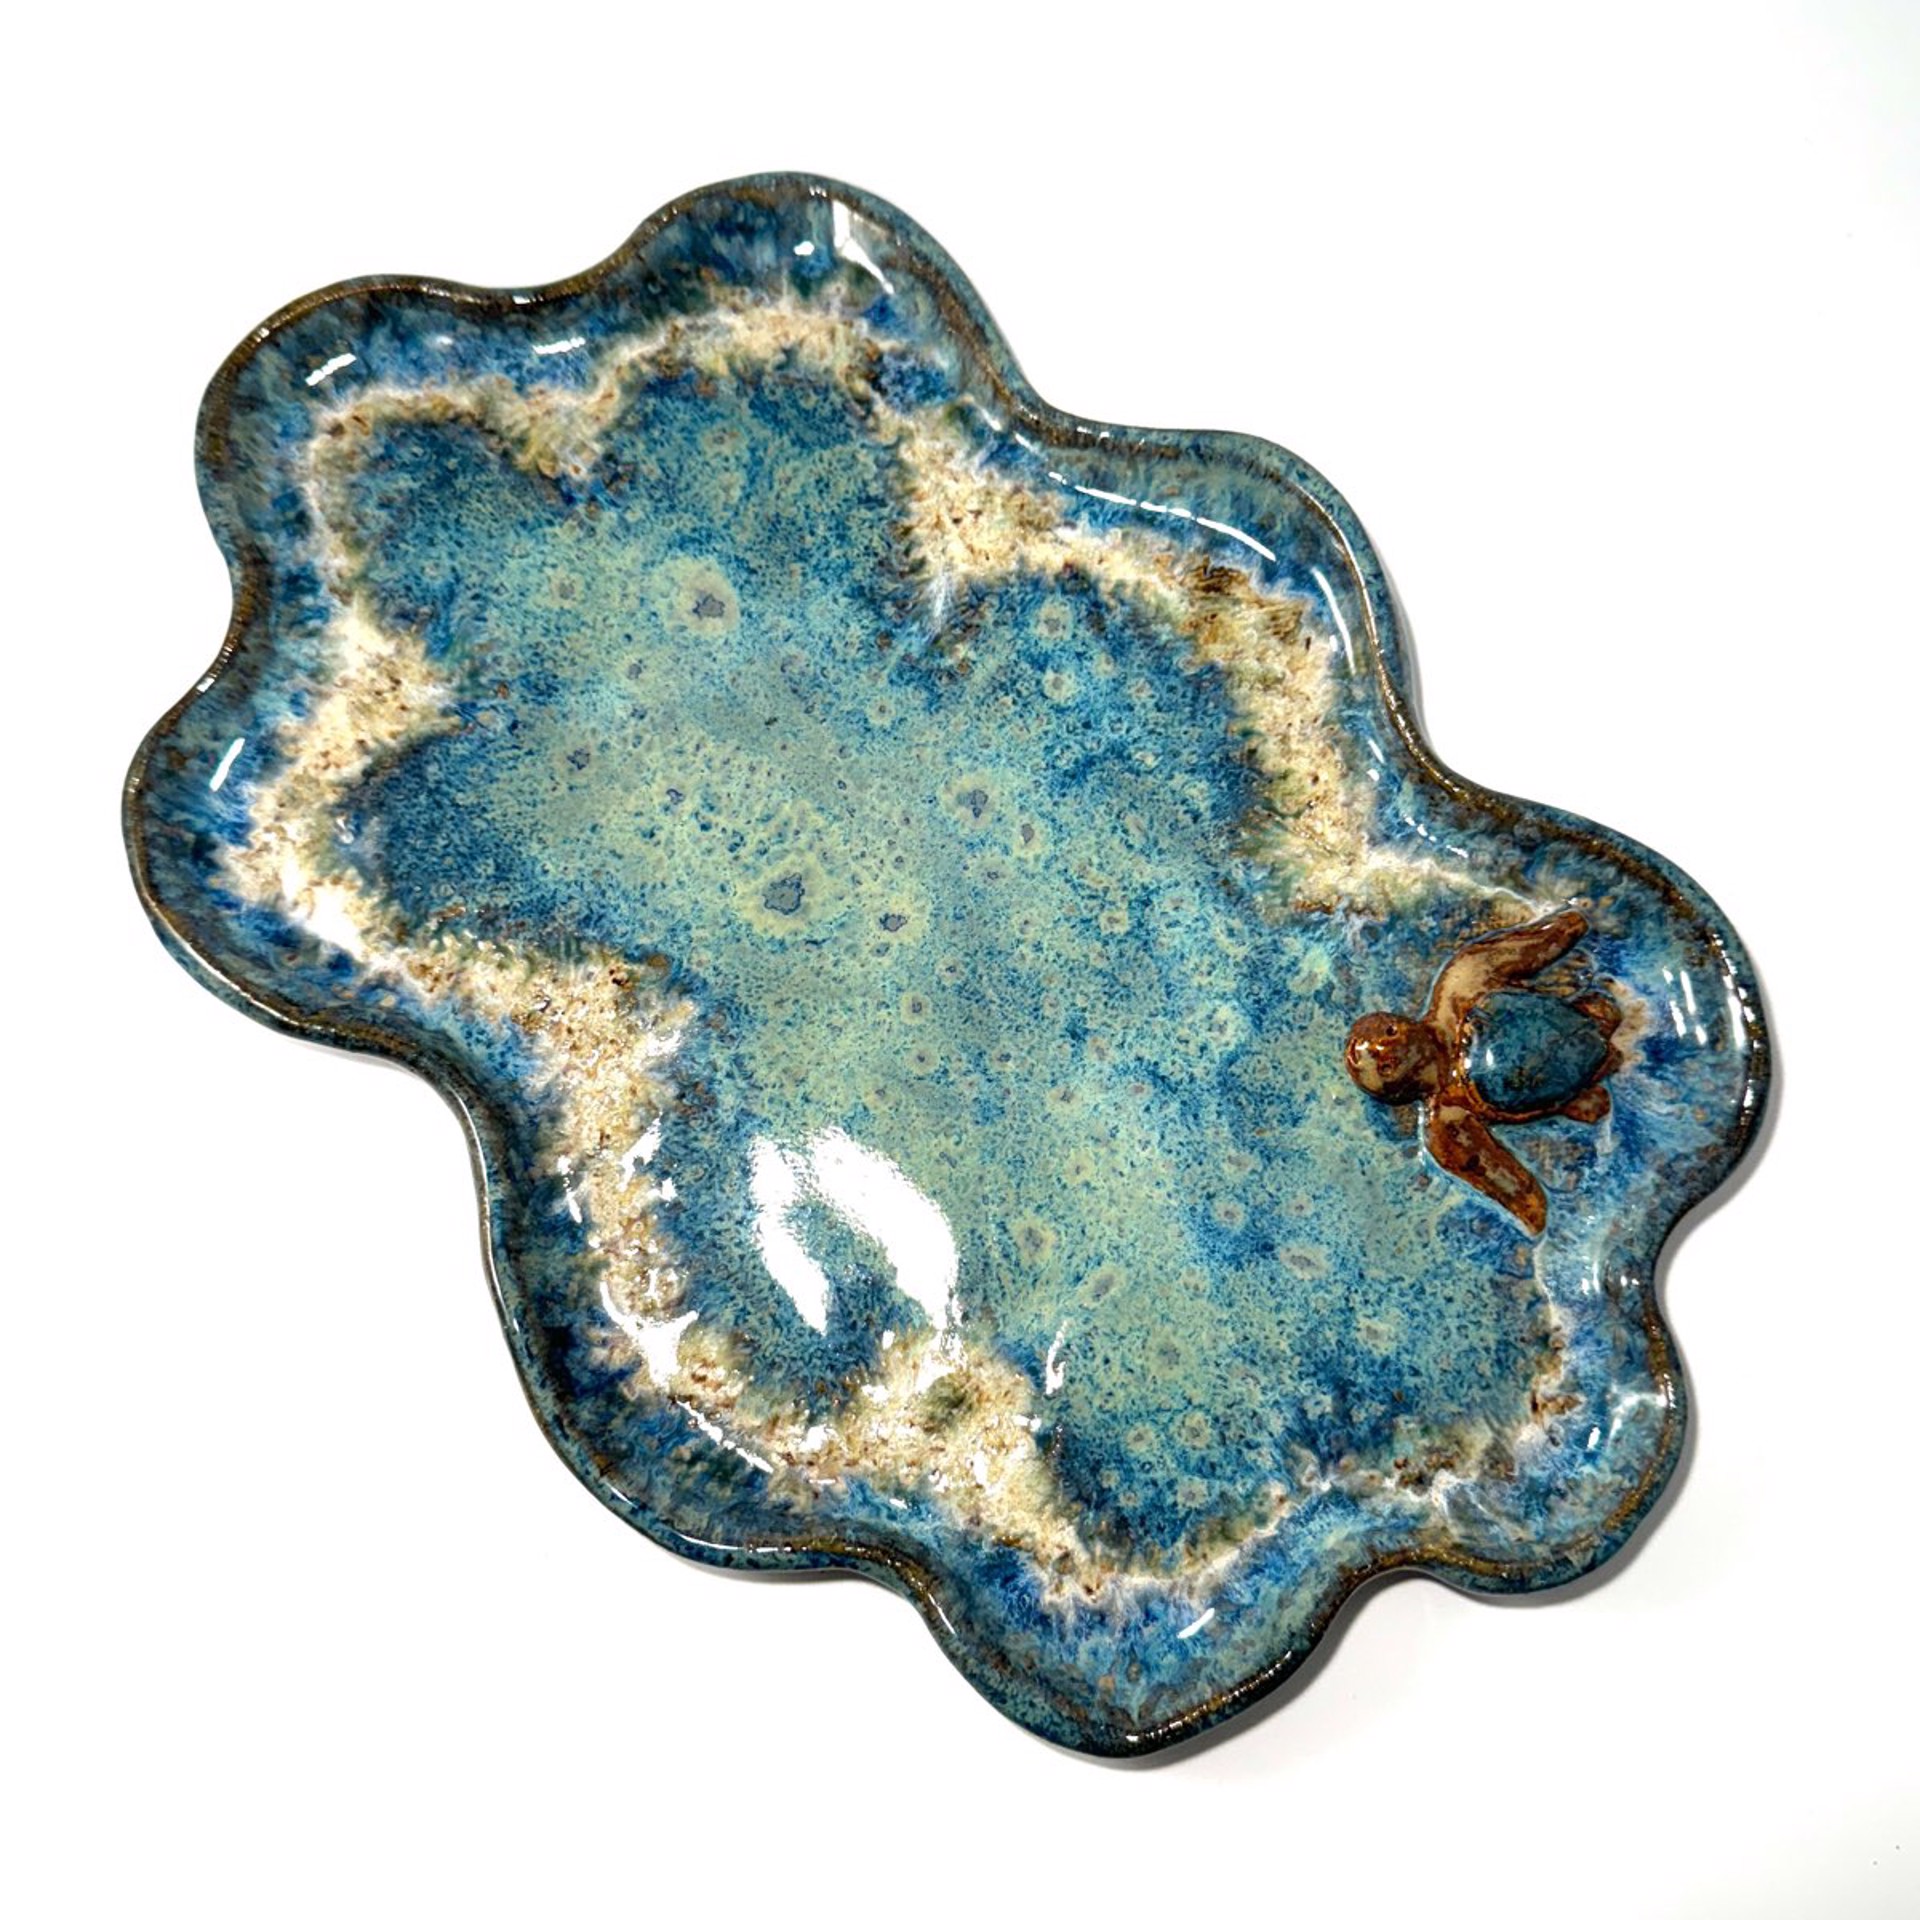 Plate with One Turtle (Blue Glaze) LG24-1219 by Jim & Steffi Logan